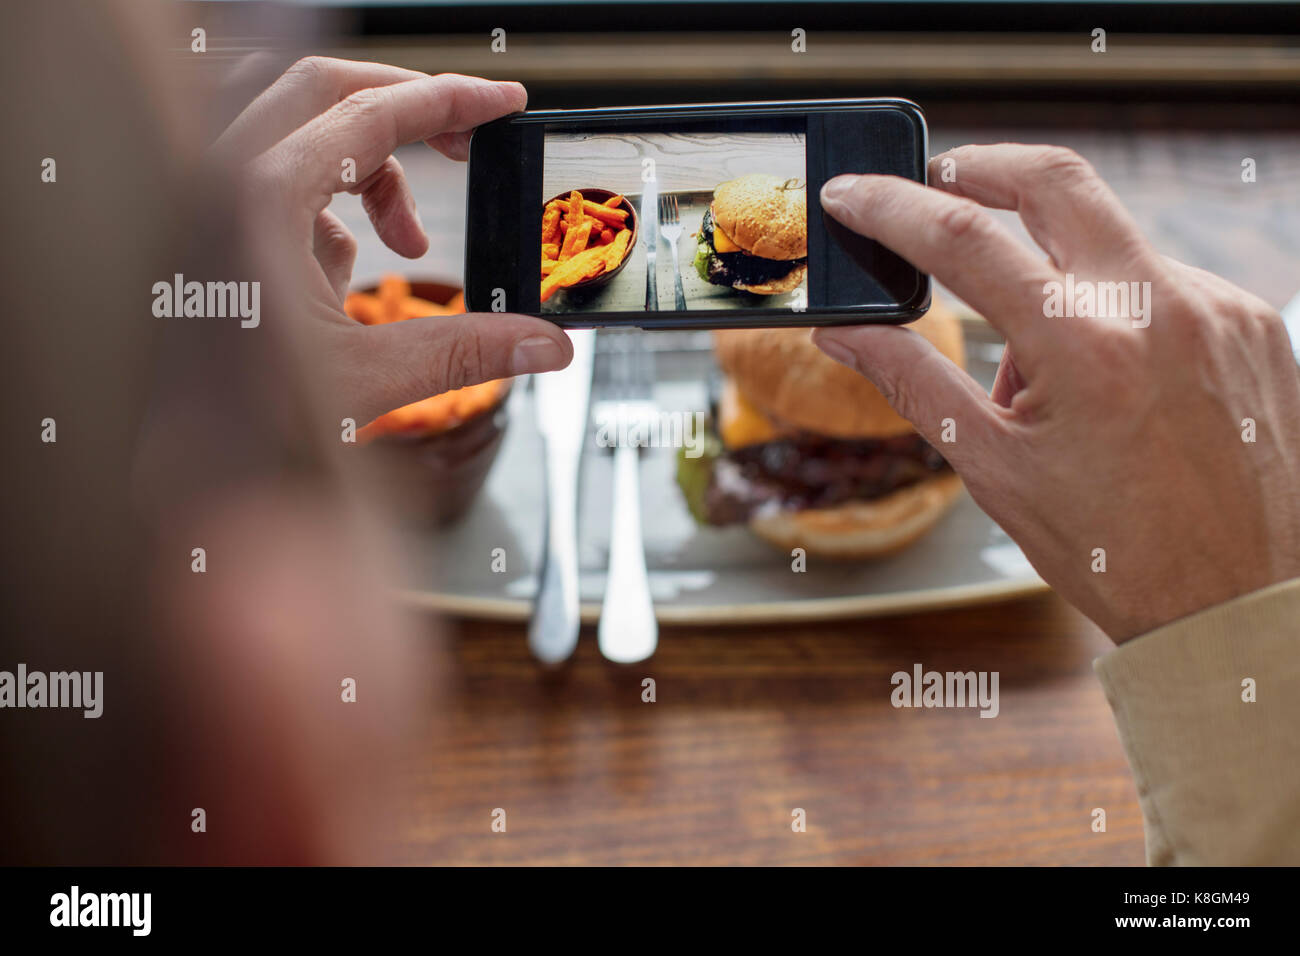 Man photographing food with smartphone Stock Photo